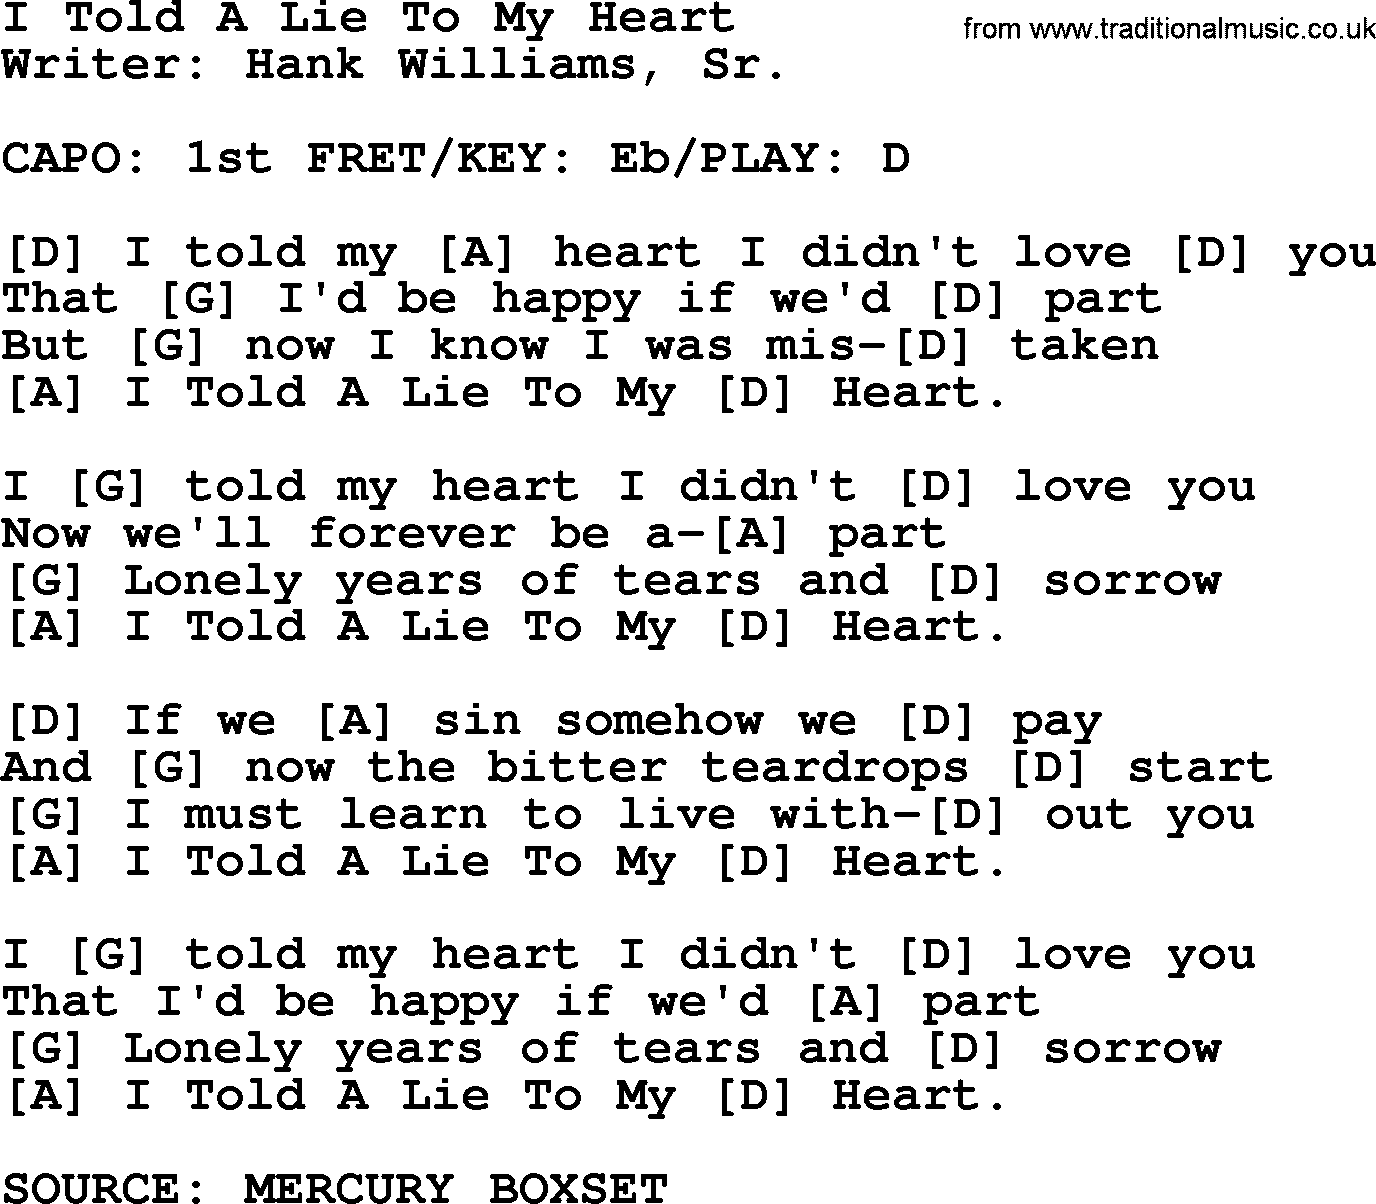 Hank Williams song I Told A Lie To My Heart, lyrics and chords